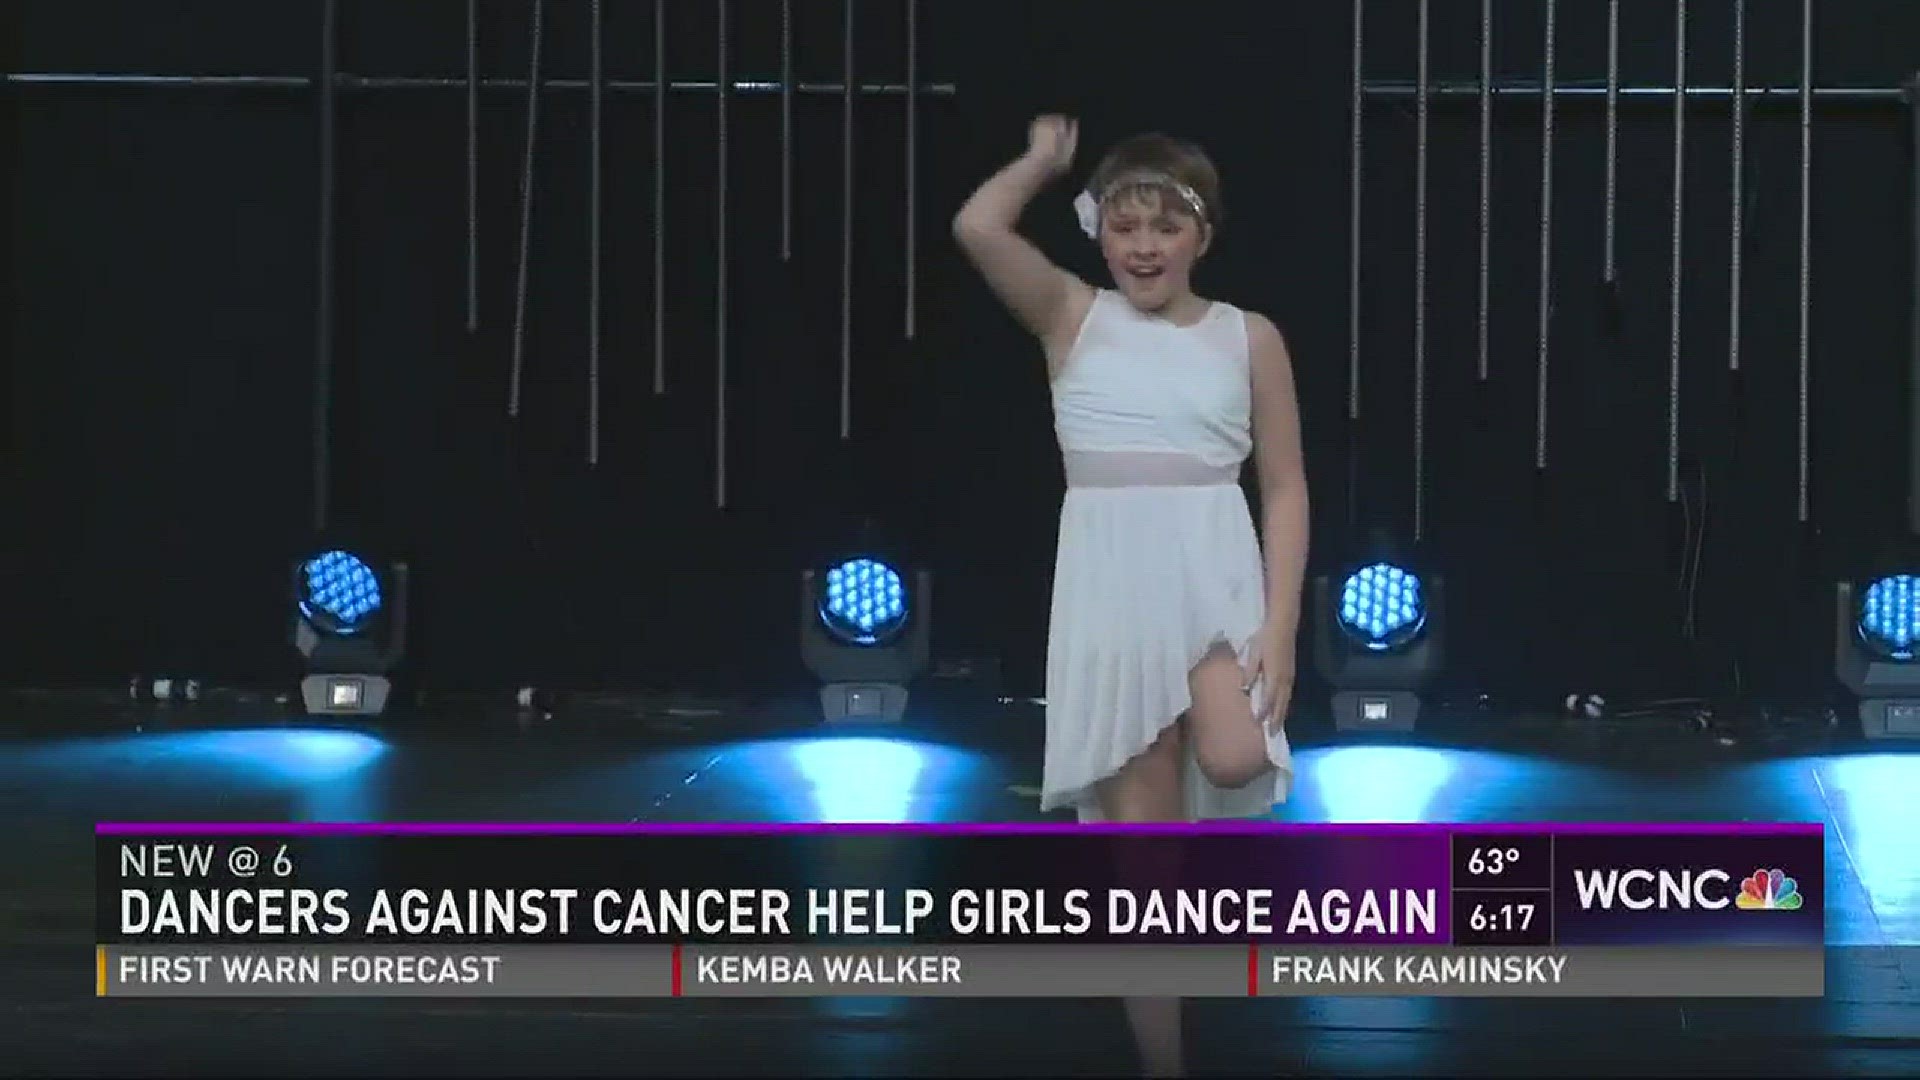 NBC Charlotte's parent company, TEGNA, awarded WCNC-TV $29,000 in grant money, which the station distributed to a variety of nonprofits and organizations. One of those, Dancers for Cancer, is helping a student affected by cancer by raising money for the m